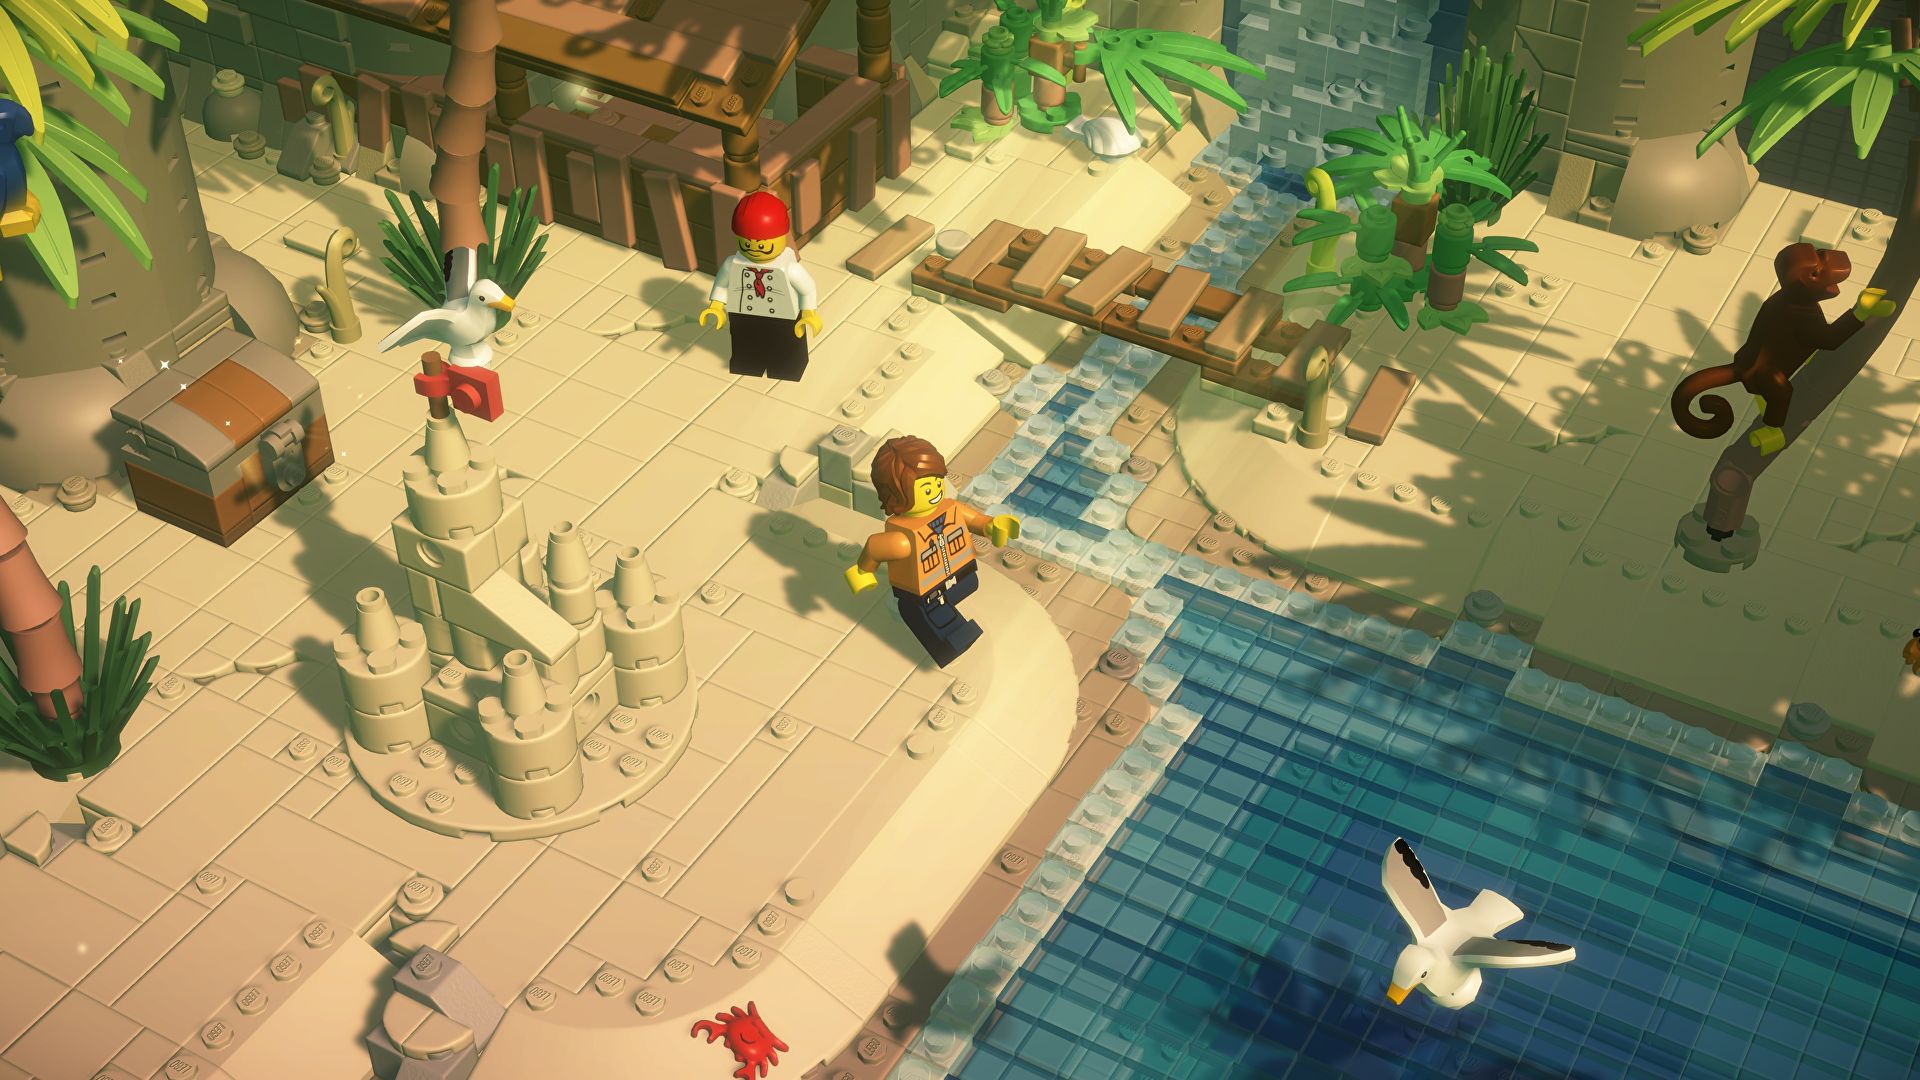 new-physics-puzzler-lego-bricktales-has-awoken-my-inner-child